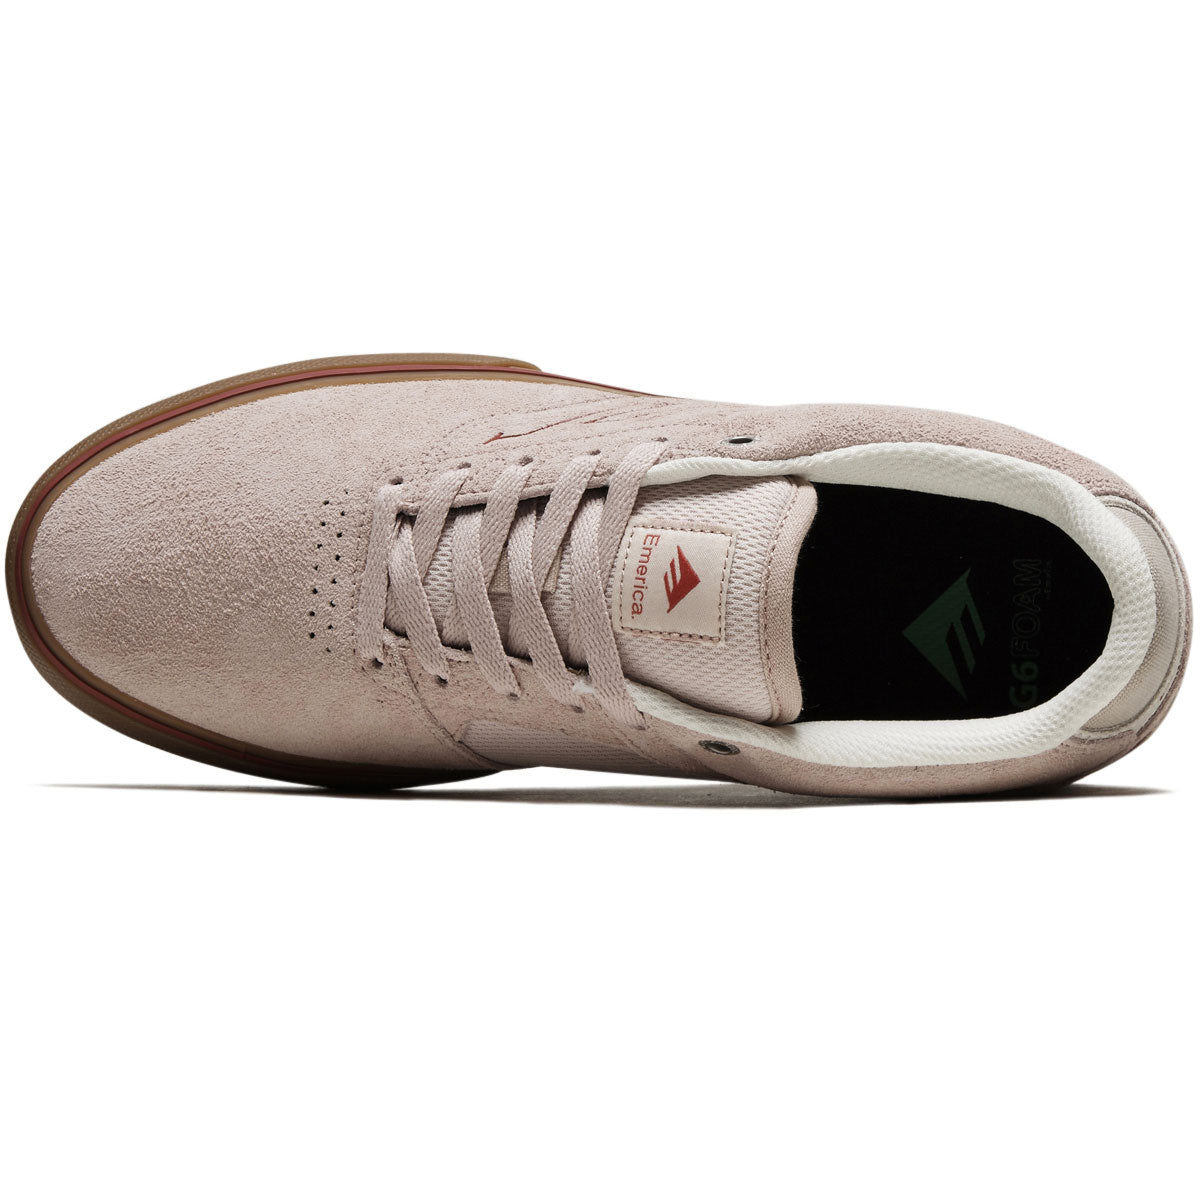 Emerica The Low Vulc Shoes - Pink image 3